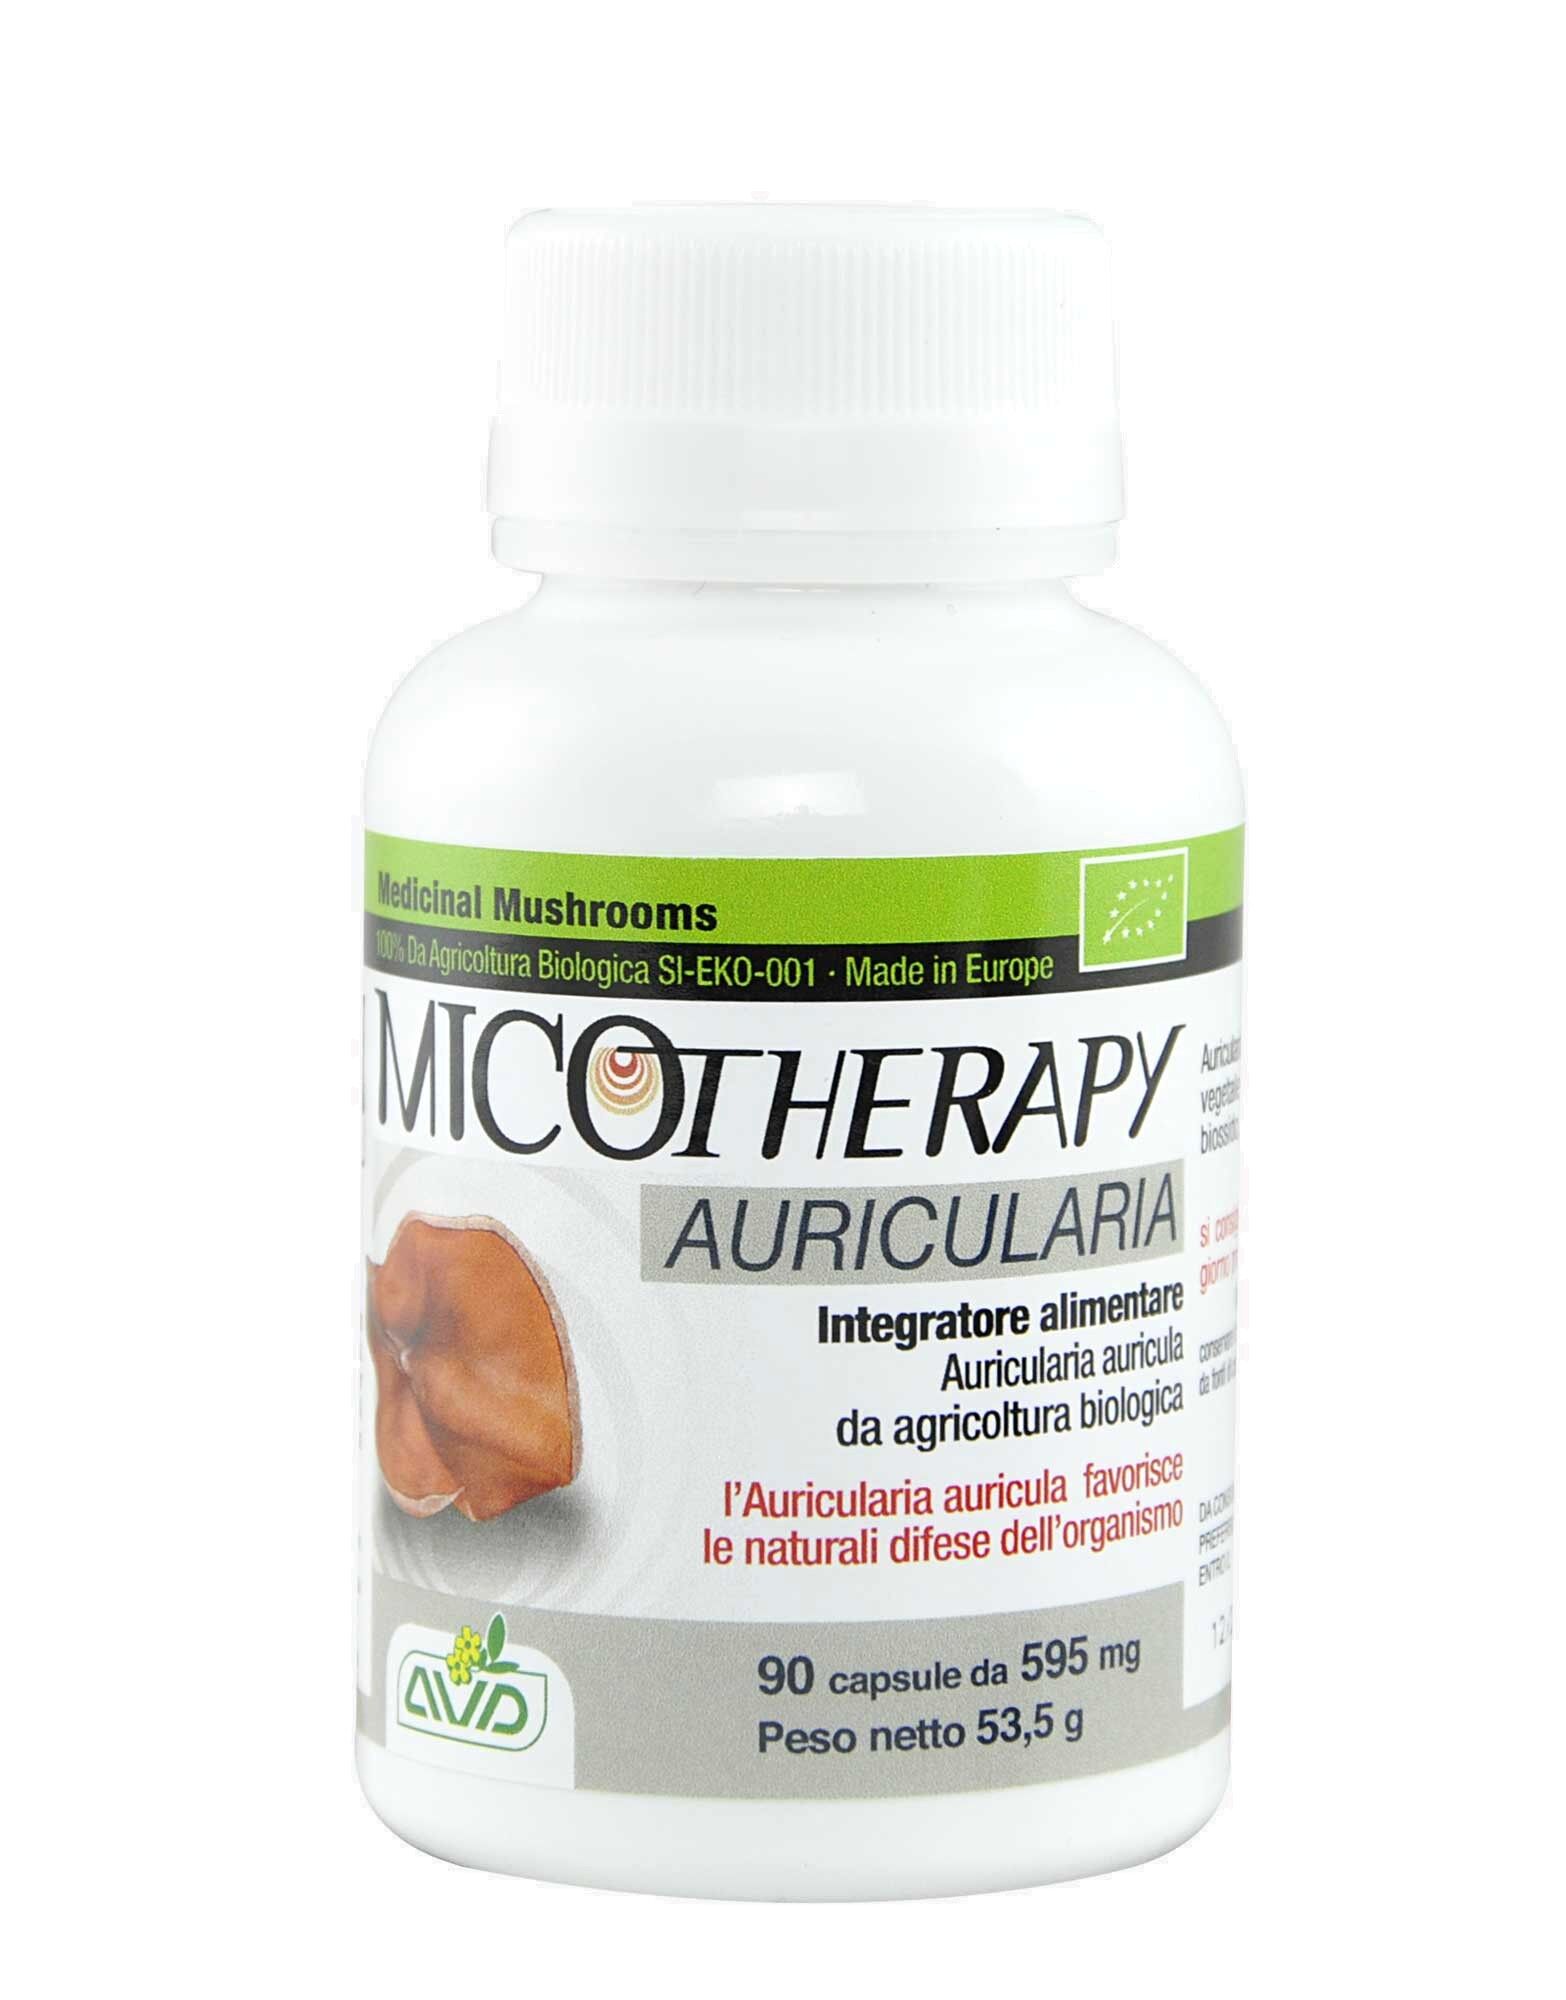 AVD Micotherapy Auricularia 90 Capsule